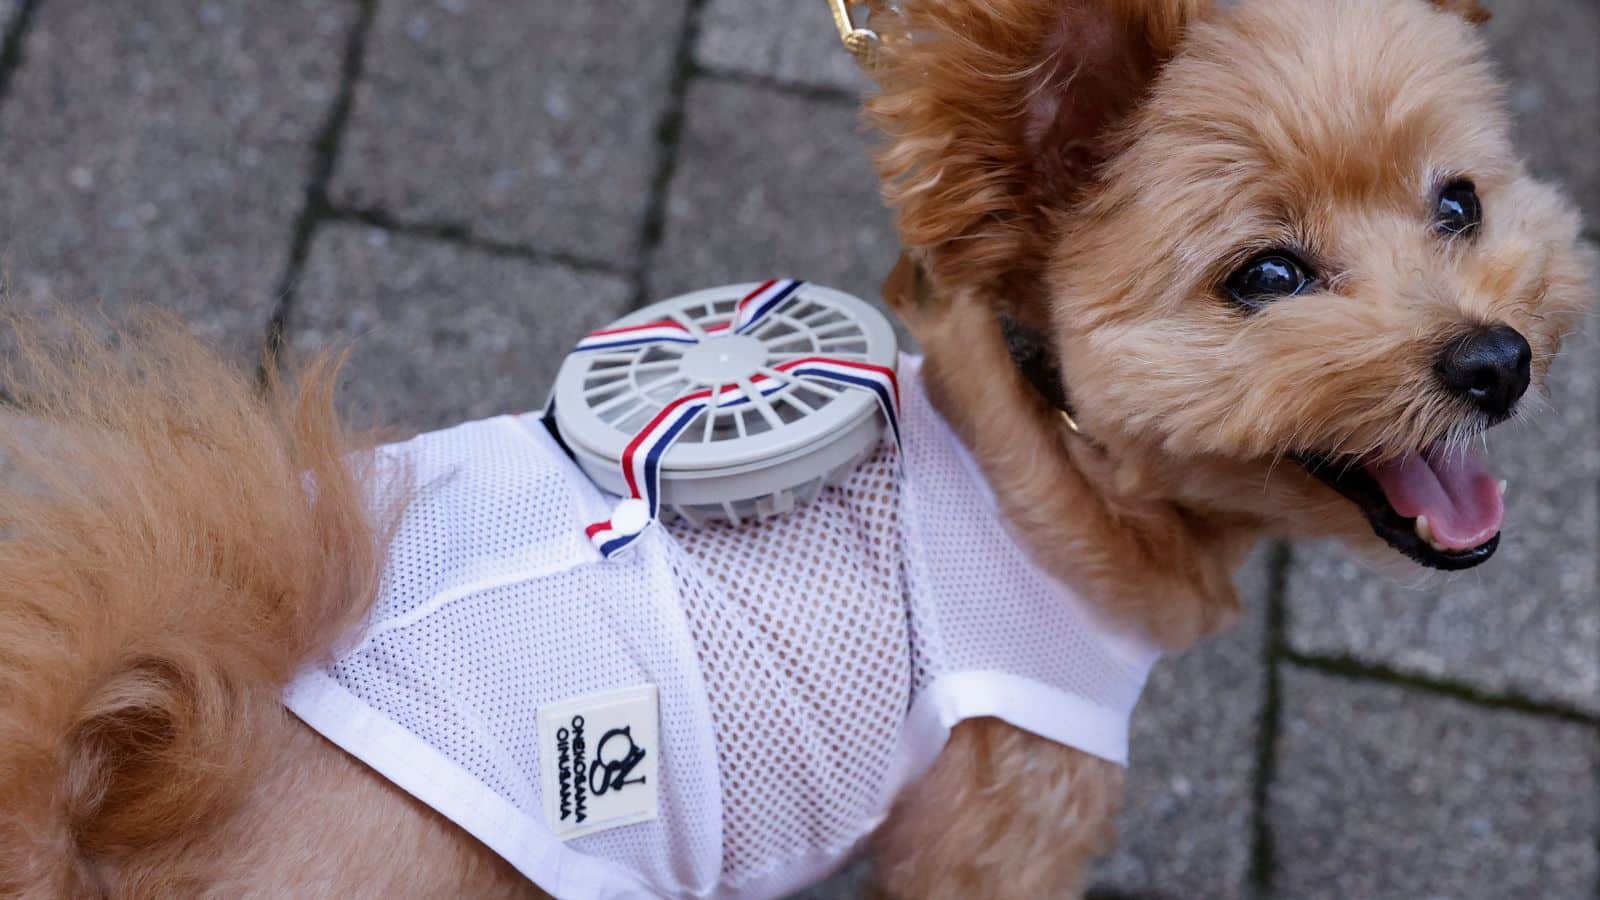 A 9-y-o female pet dog named Moco, a Pomeranian and Poodle Mix, wears a battery-powered fan outfit for pets, developed by Japanese maternity clothing maker "Sweet Mommy", in Tokyo, Japan July 28, 2022. REUTERS/Issei Kato